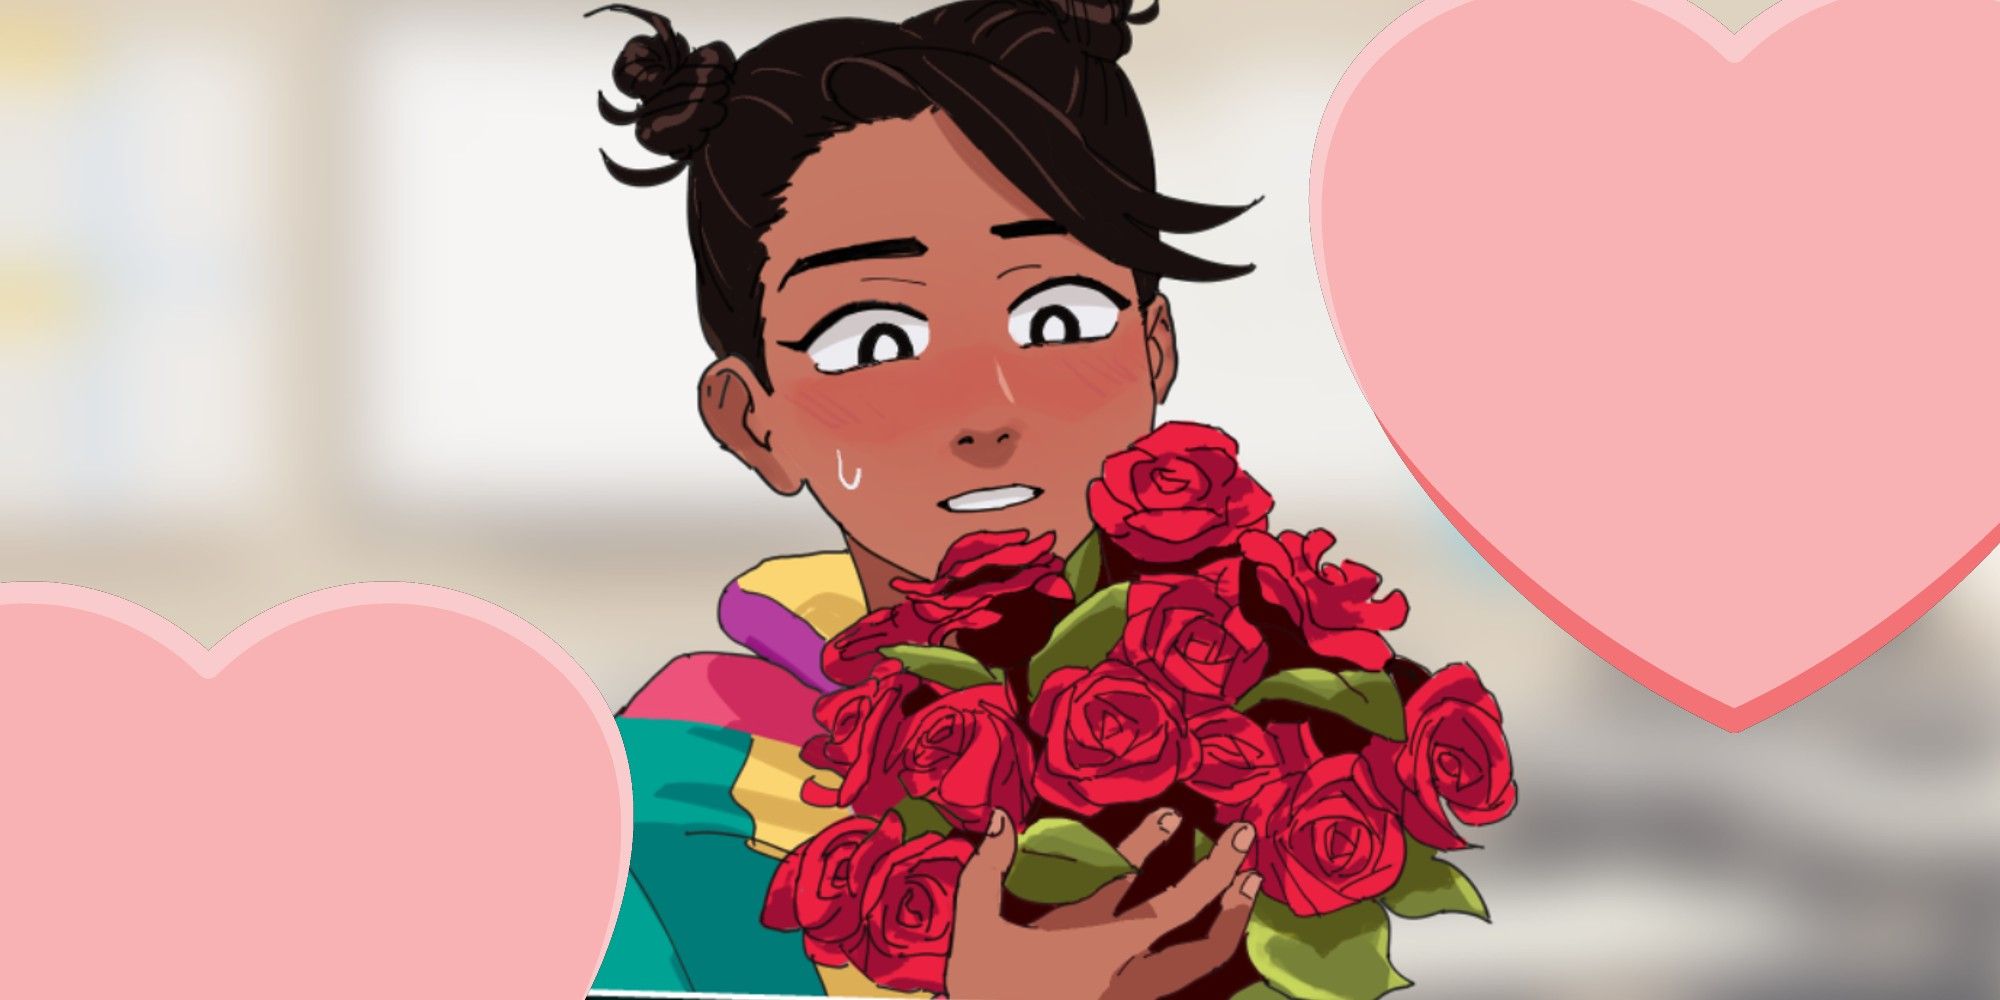 Akarsha from Butterfly Soup 2 with a bouquet if roses, with hearts at the top right and bottom left corner of the image.